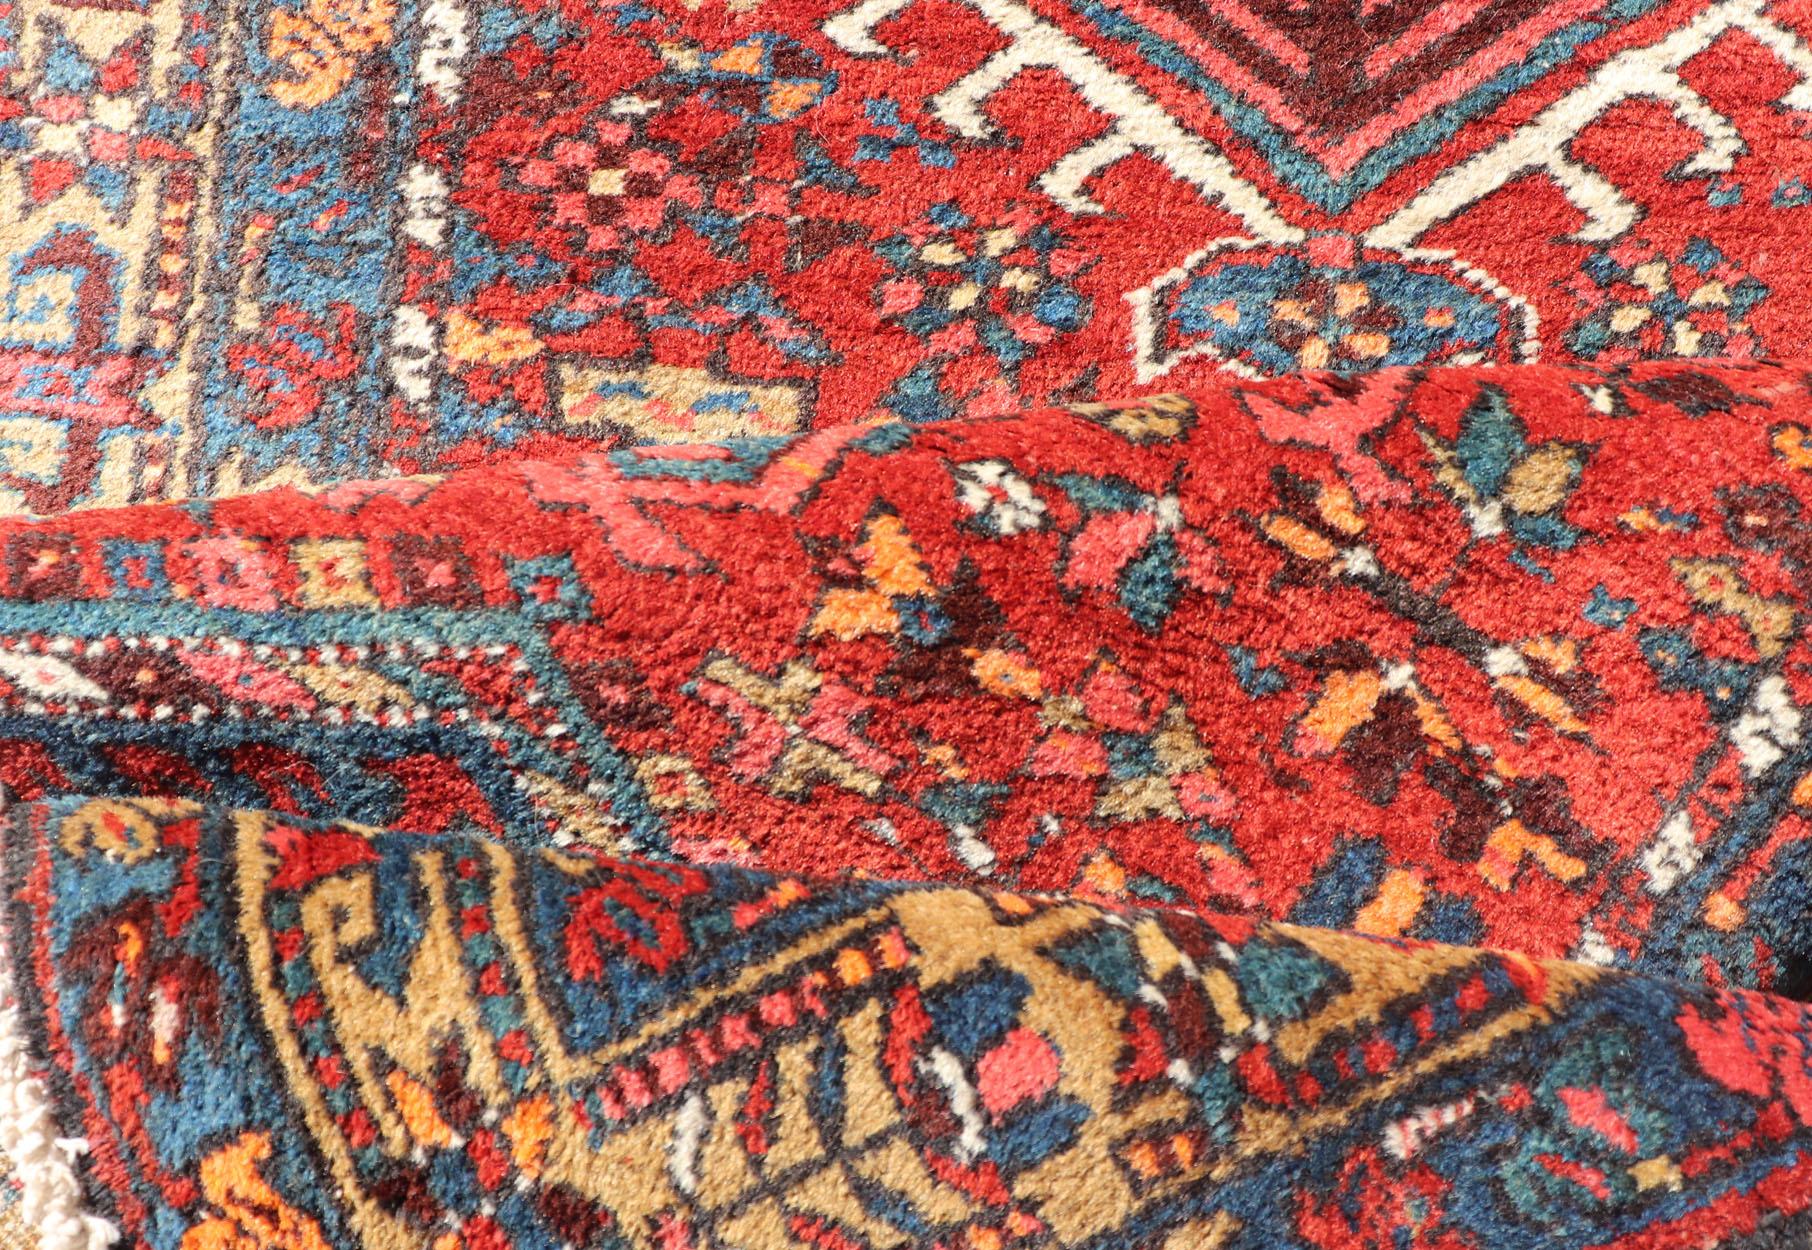 Antique Geometric Persian Long Heriz Runner in Red, Blue, Yellow, Teal, Orange For Sale 5